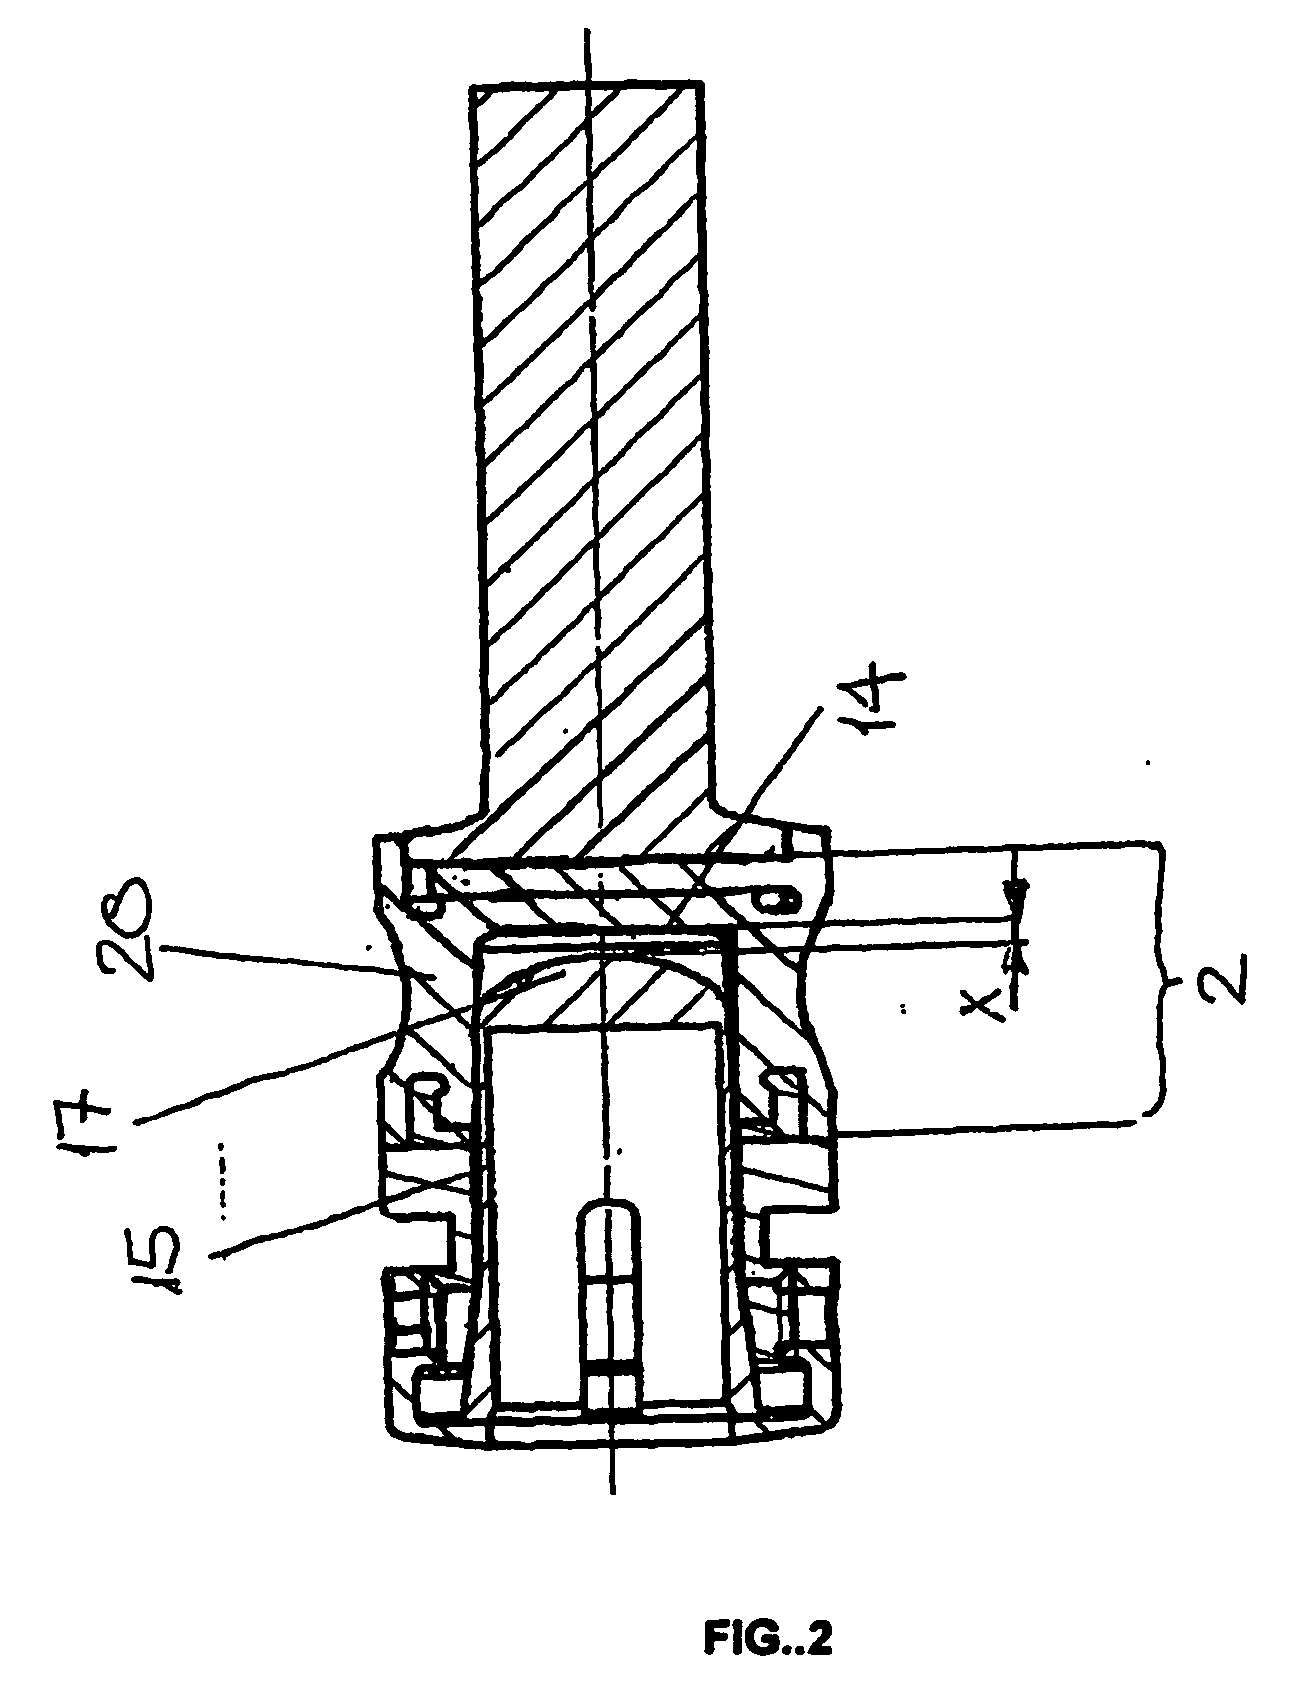 Dynamic damping element for two bones